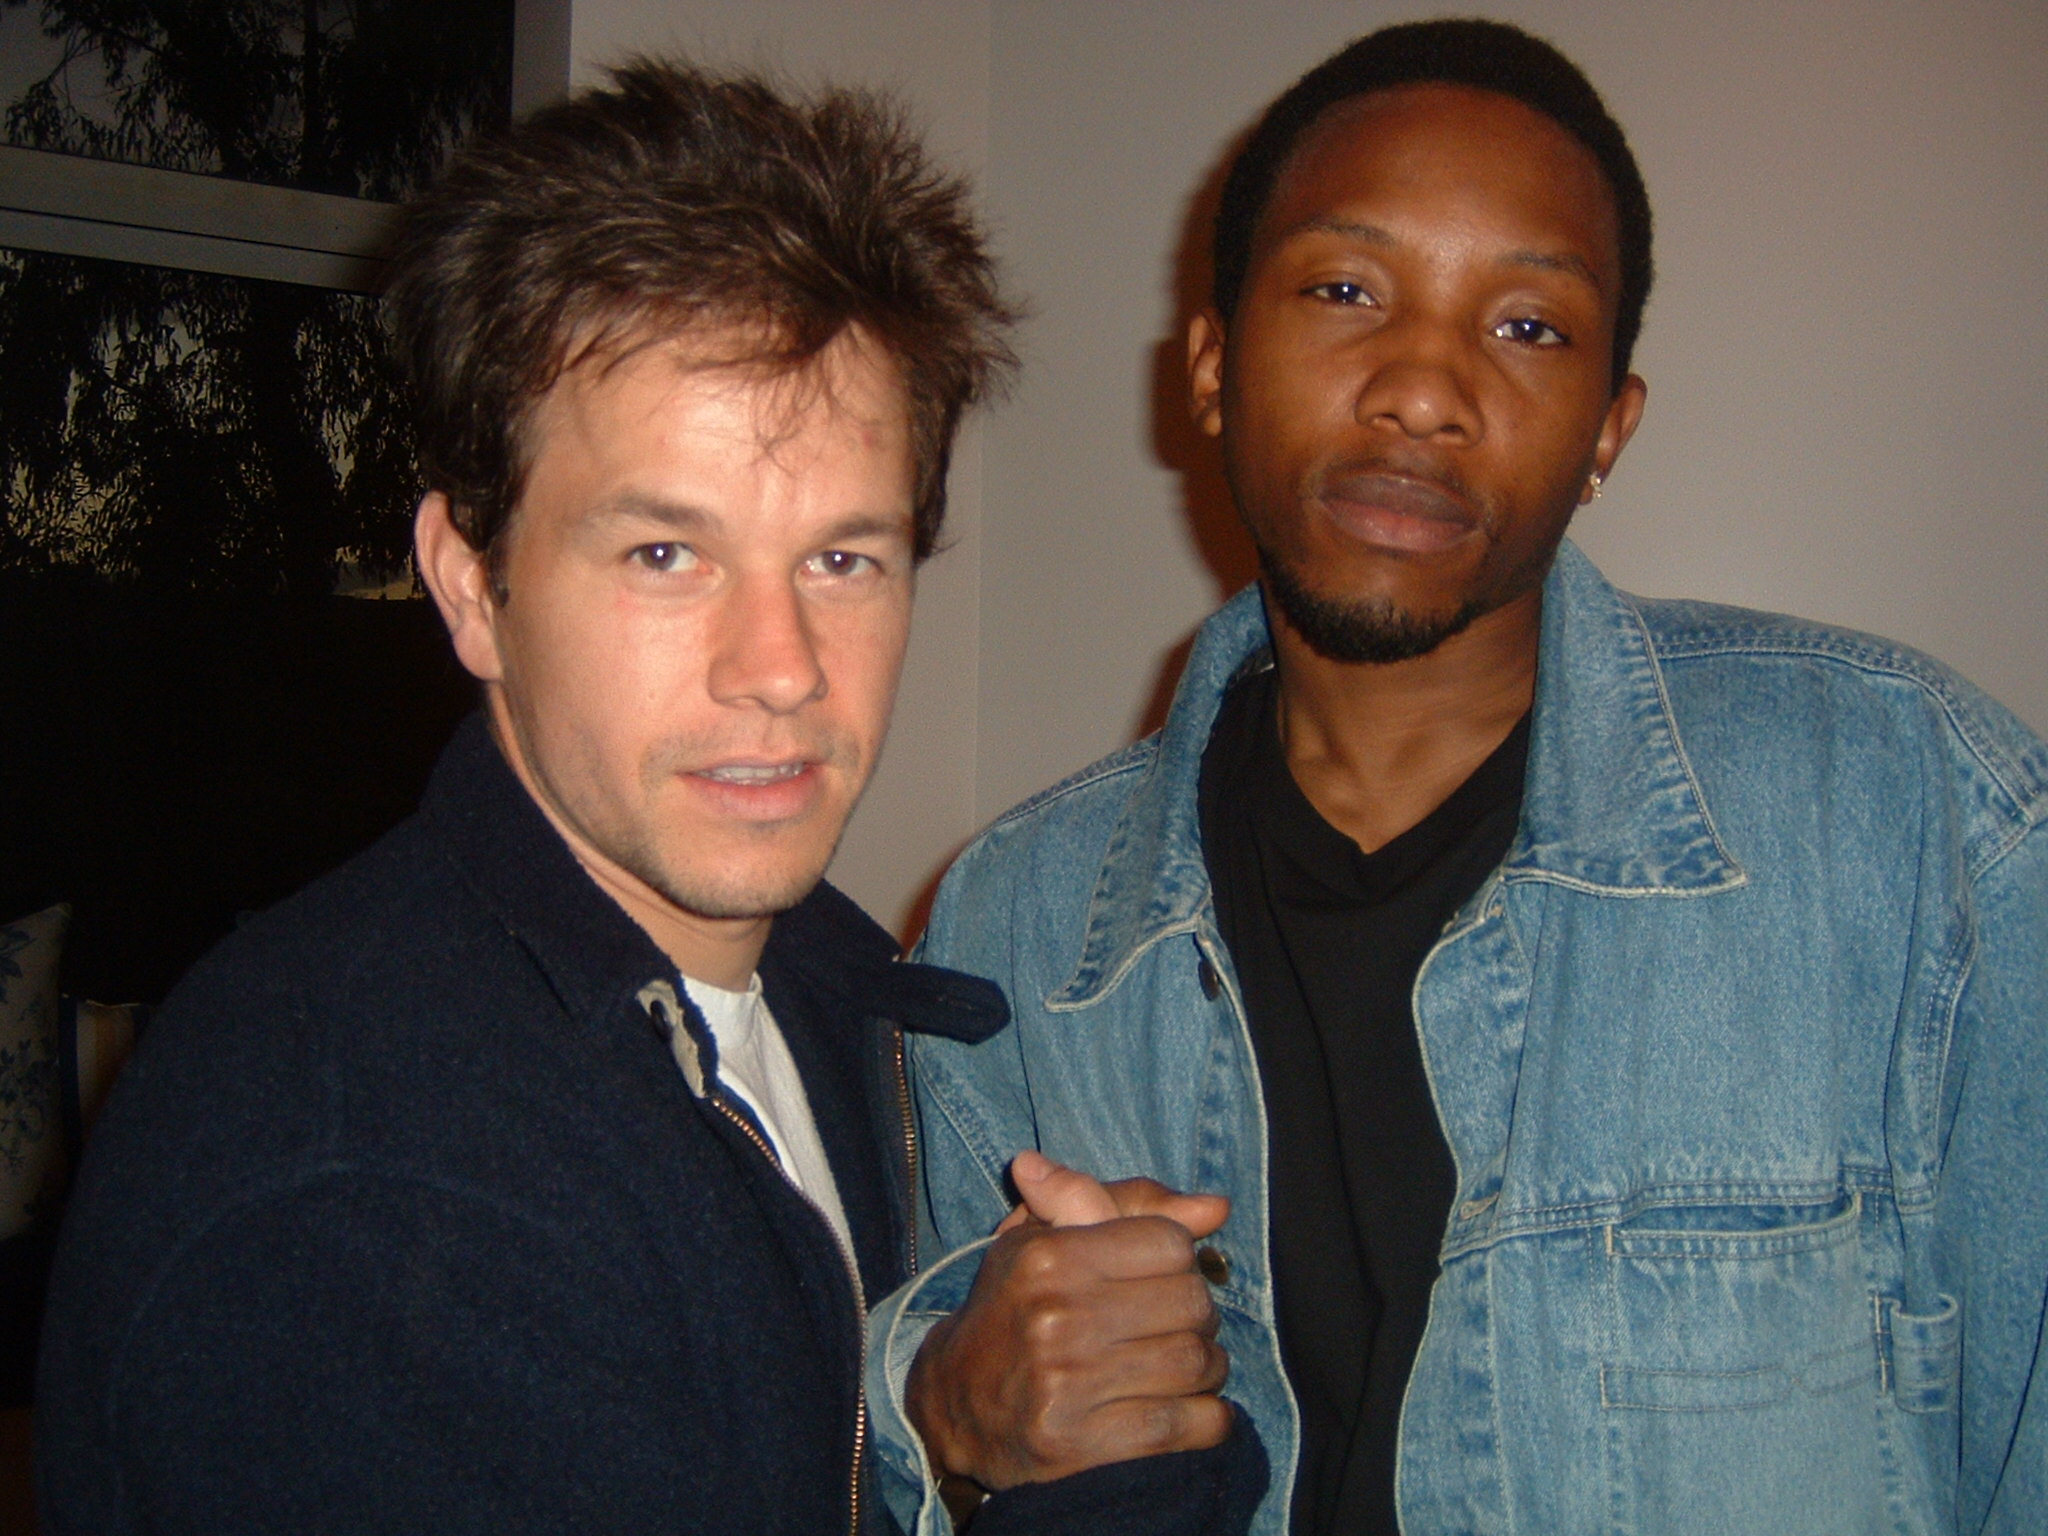 Mark Wahlberg and K.C. Collins